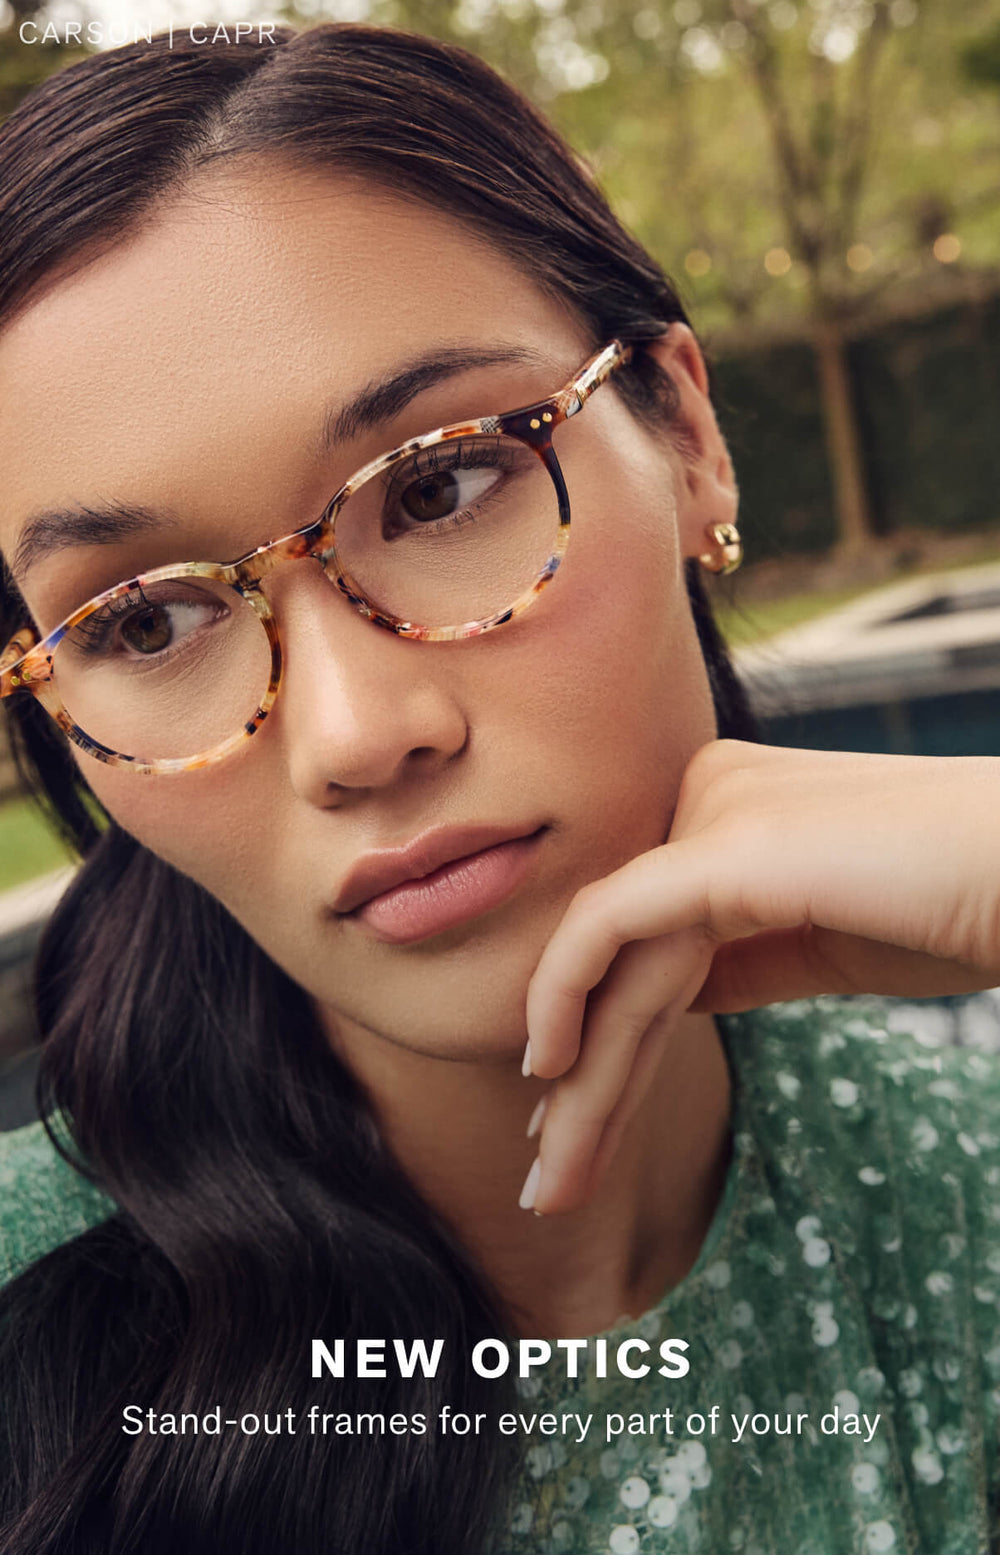 New Optics Stand-out frames for every part of your day  Edit alt text